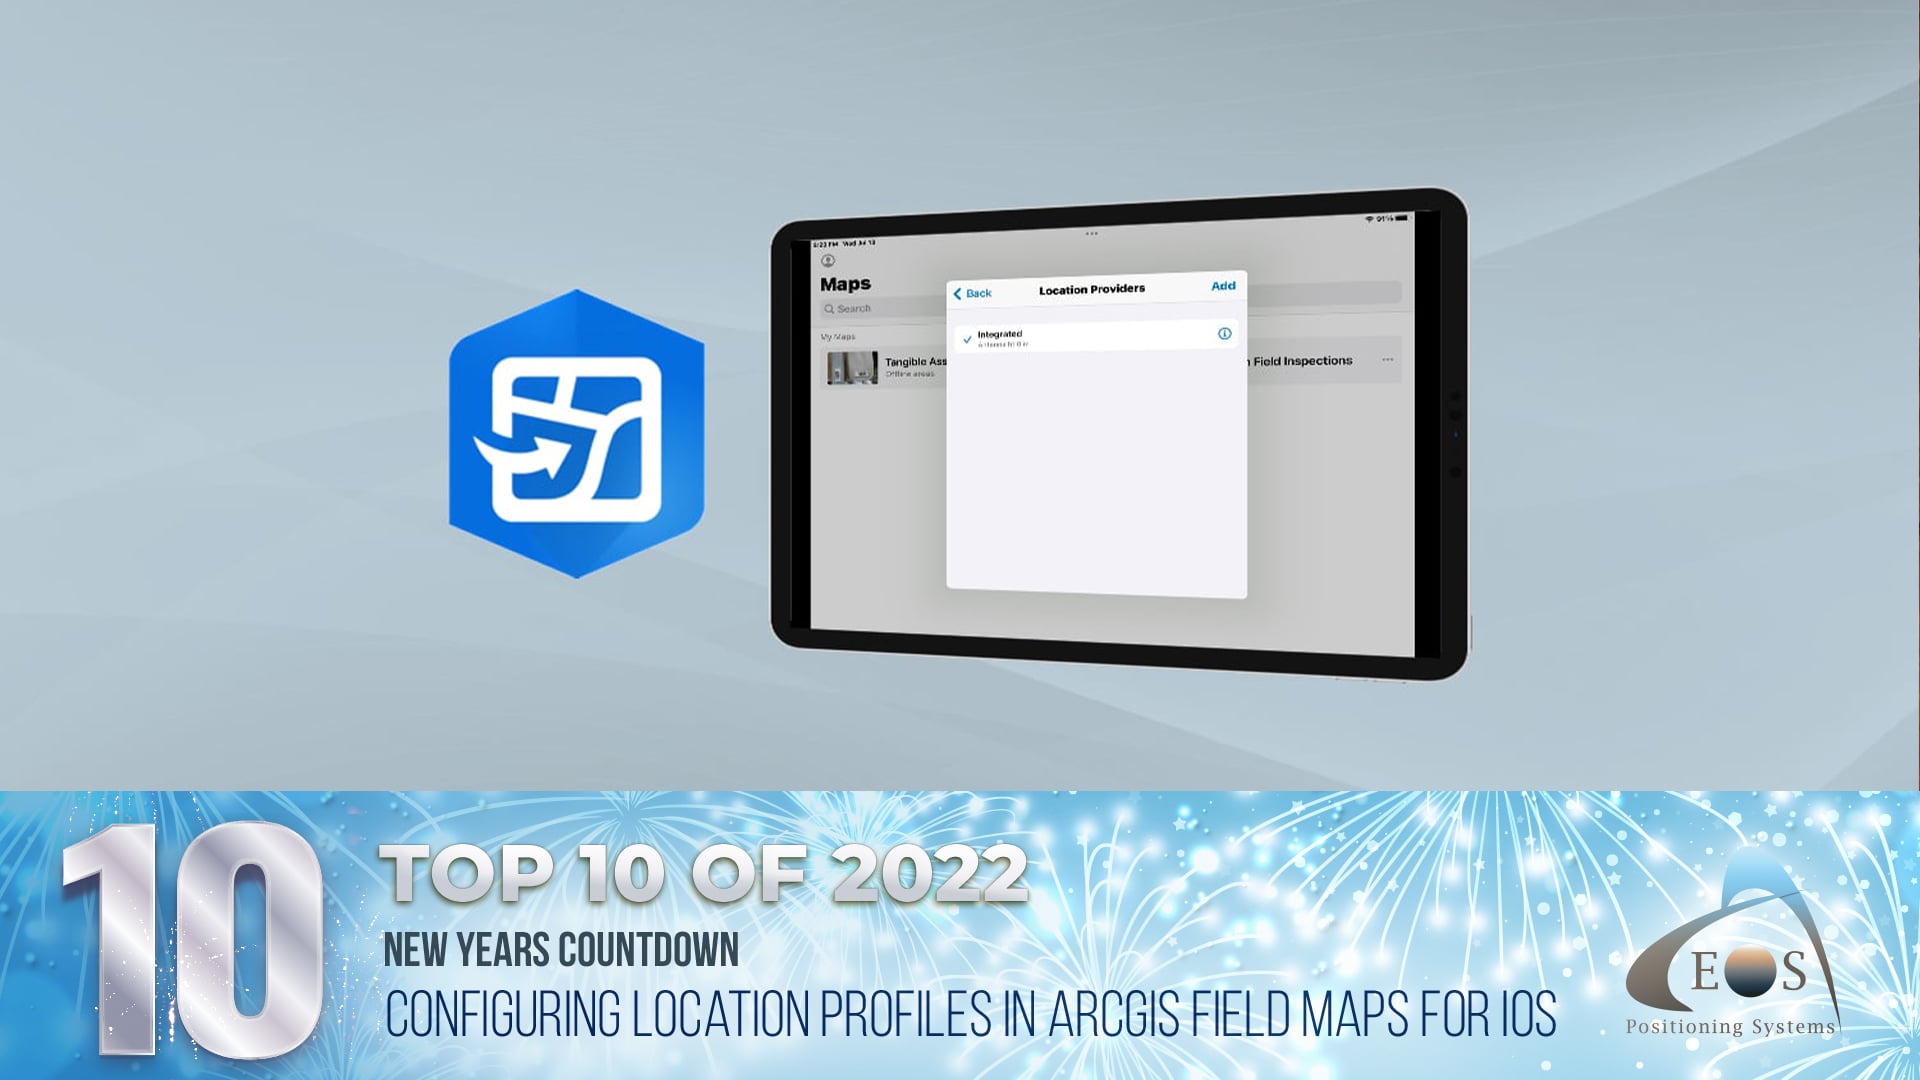 10 Configuring Location Profiles in ArcGIS Field Maps for iOS - Top 10 of 2022